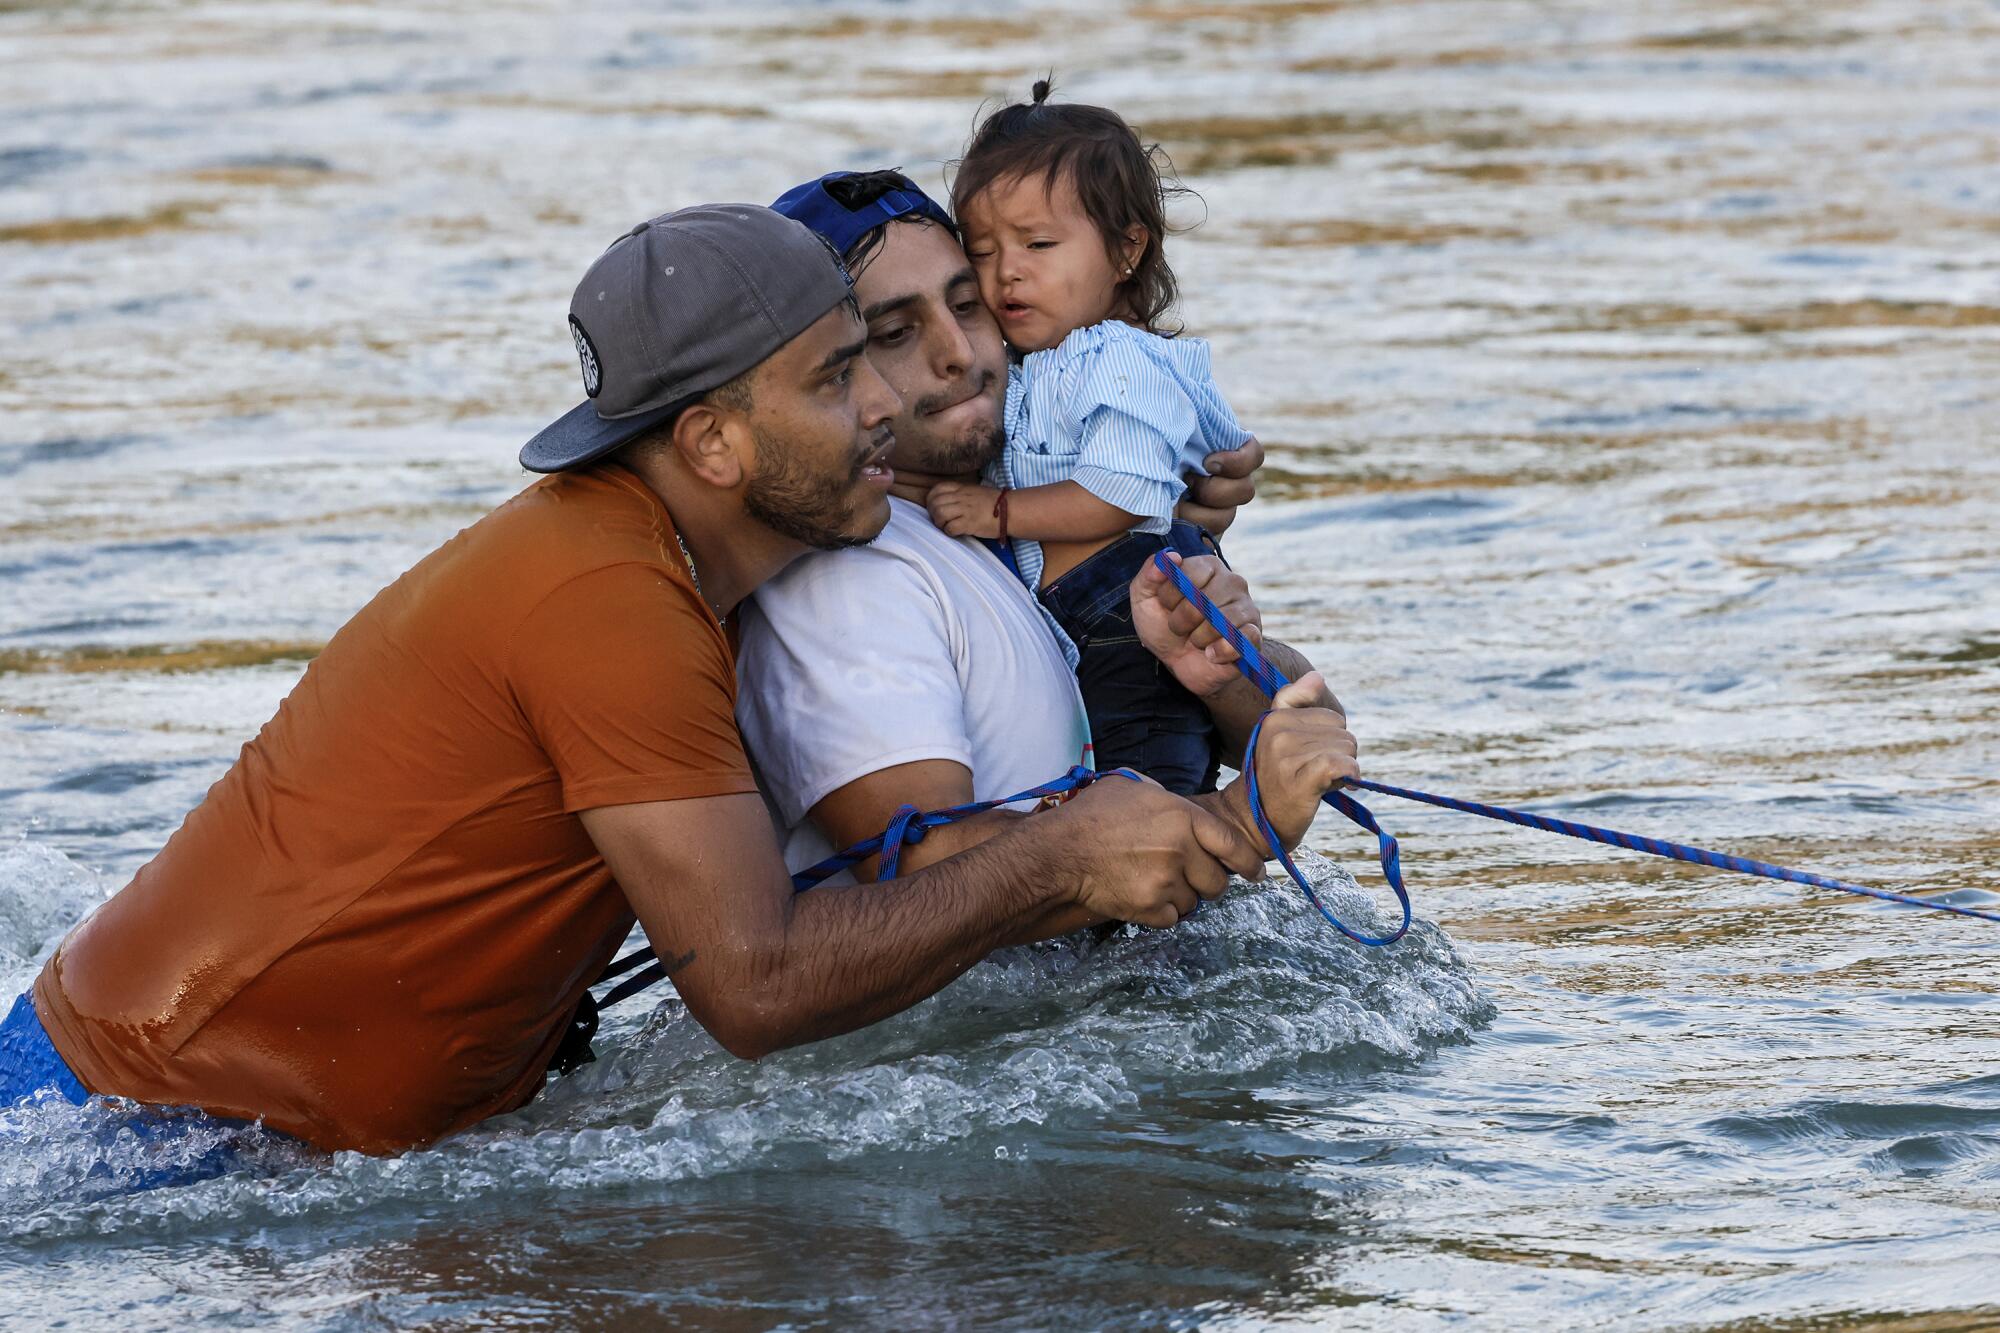 Olga Pacheco, 1, of Mexico is carried across the Rio Grande.